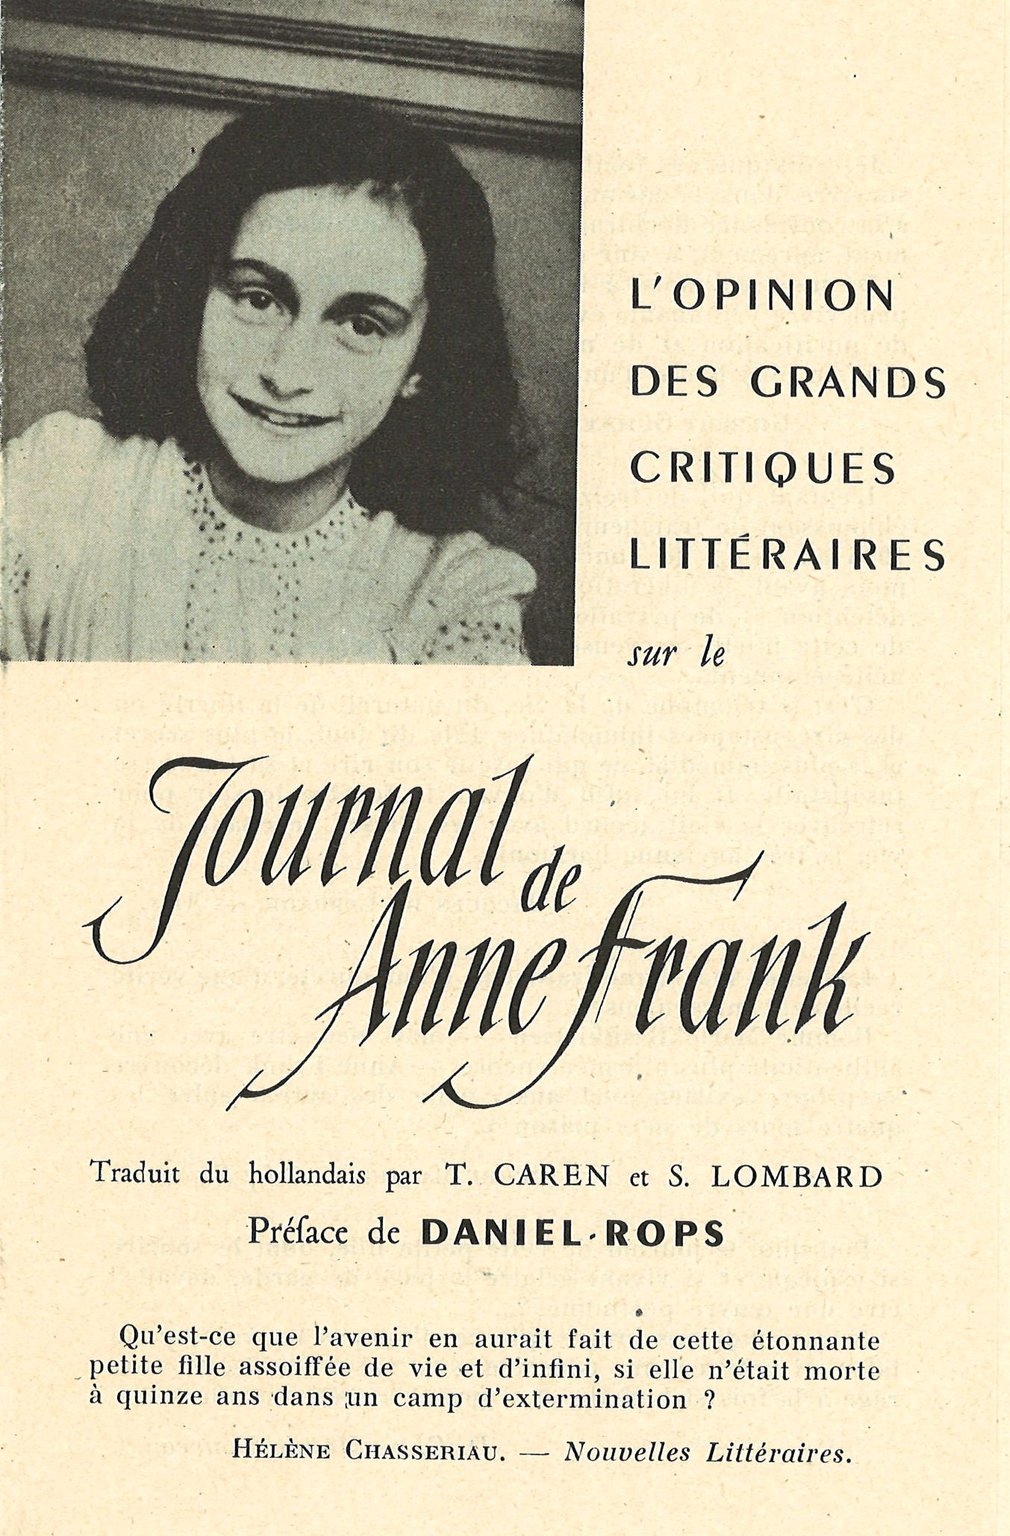 Brochure from 1951 in which French critics give their opinion of the diary of Anne Frank.